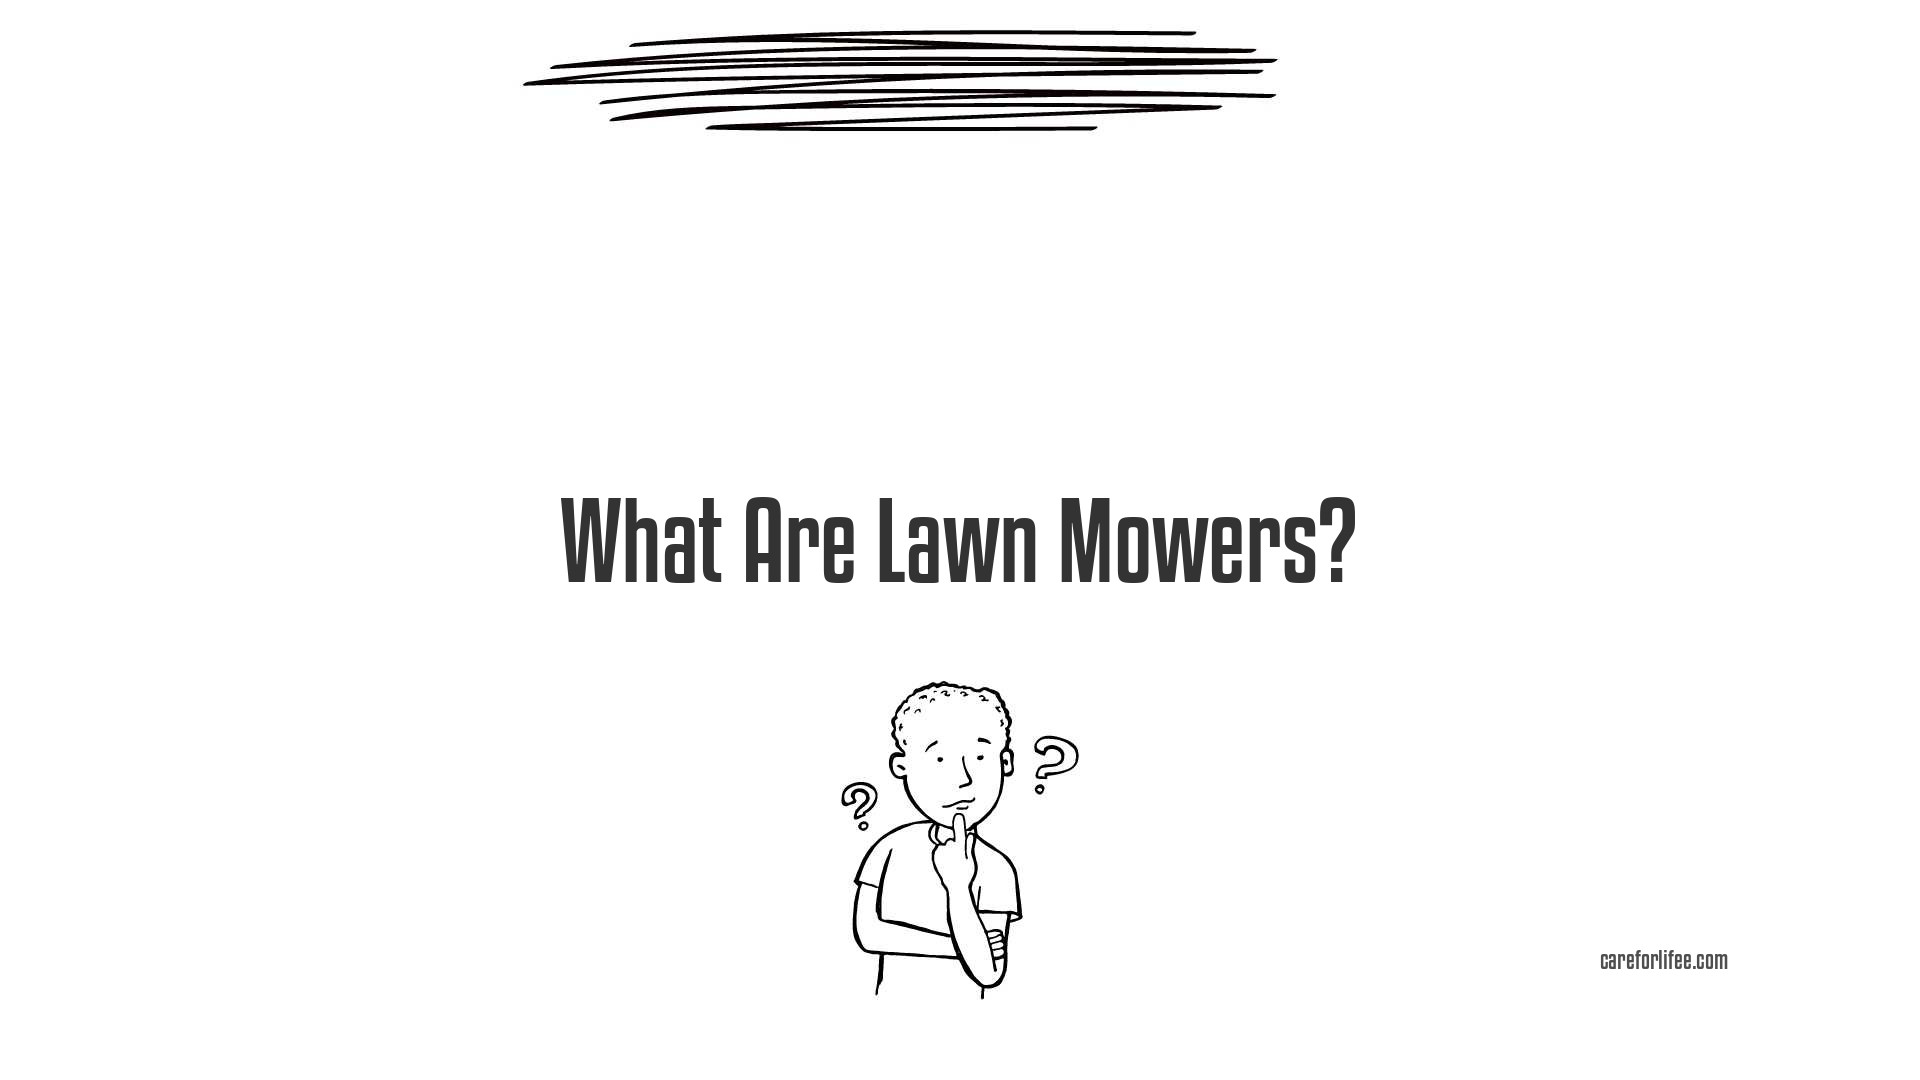 What Are Lawn Mowers?